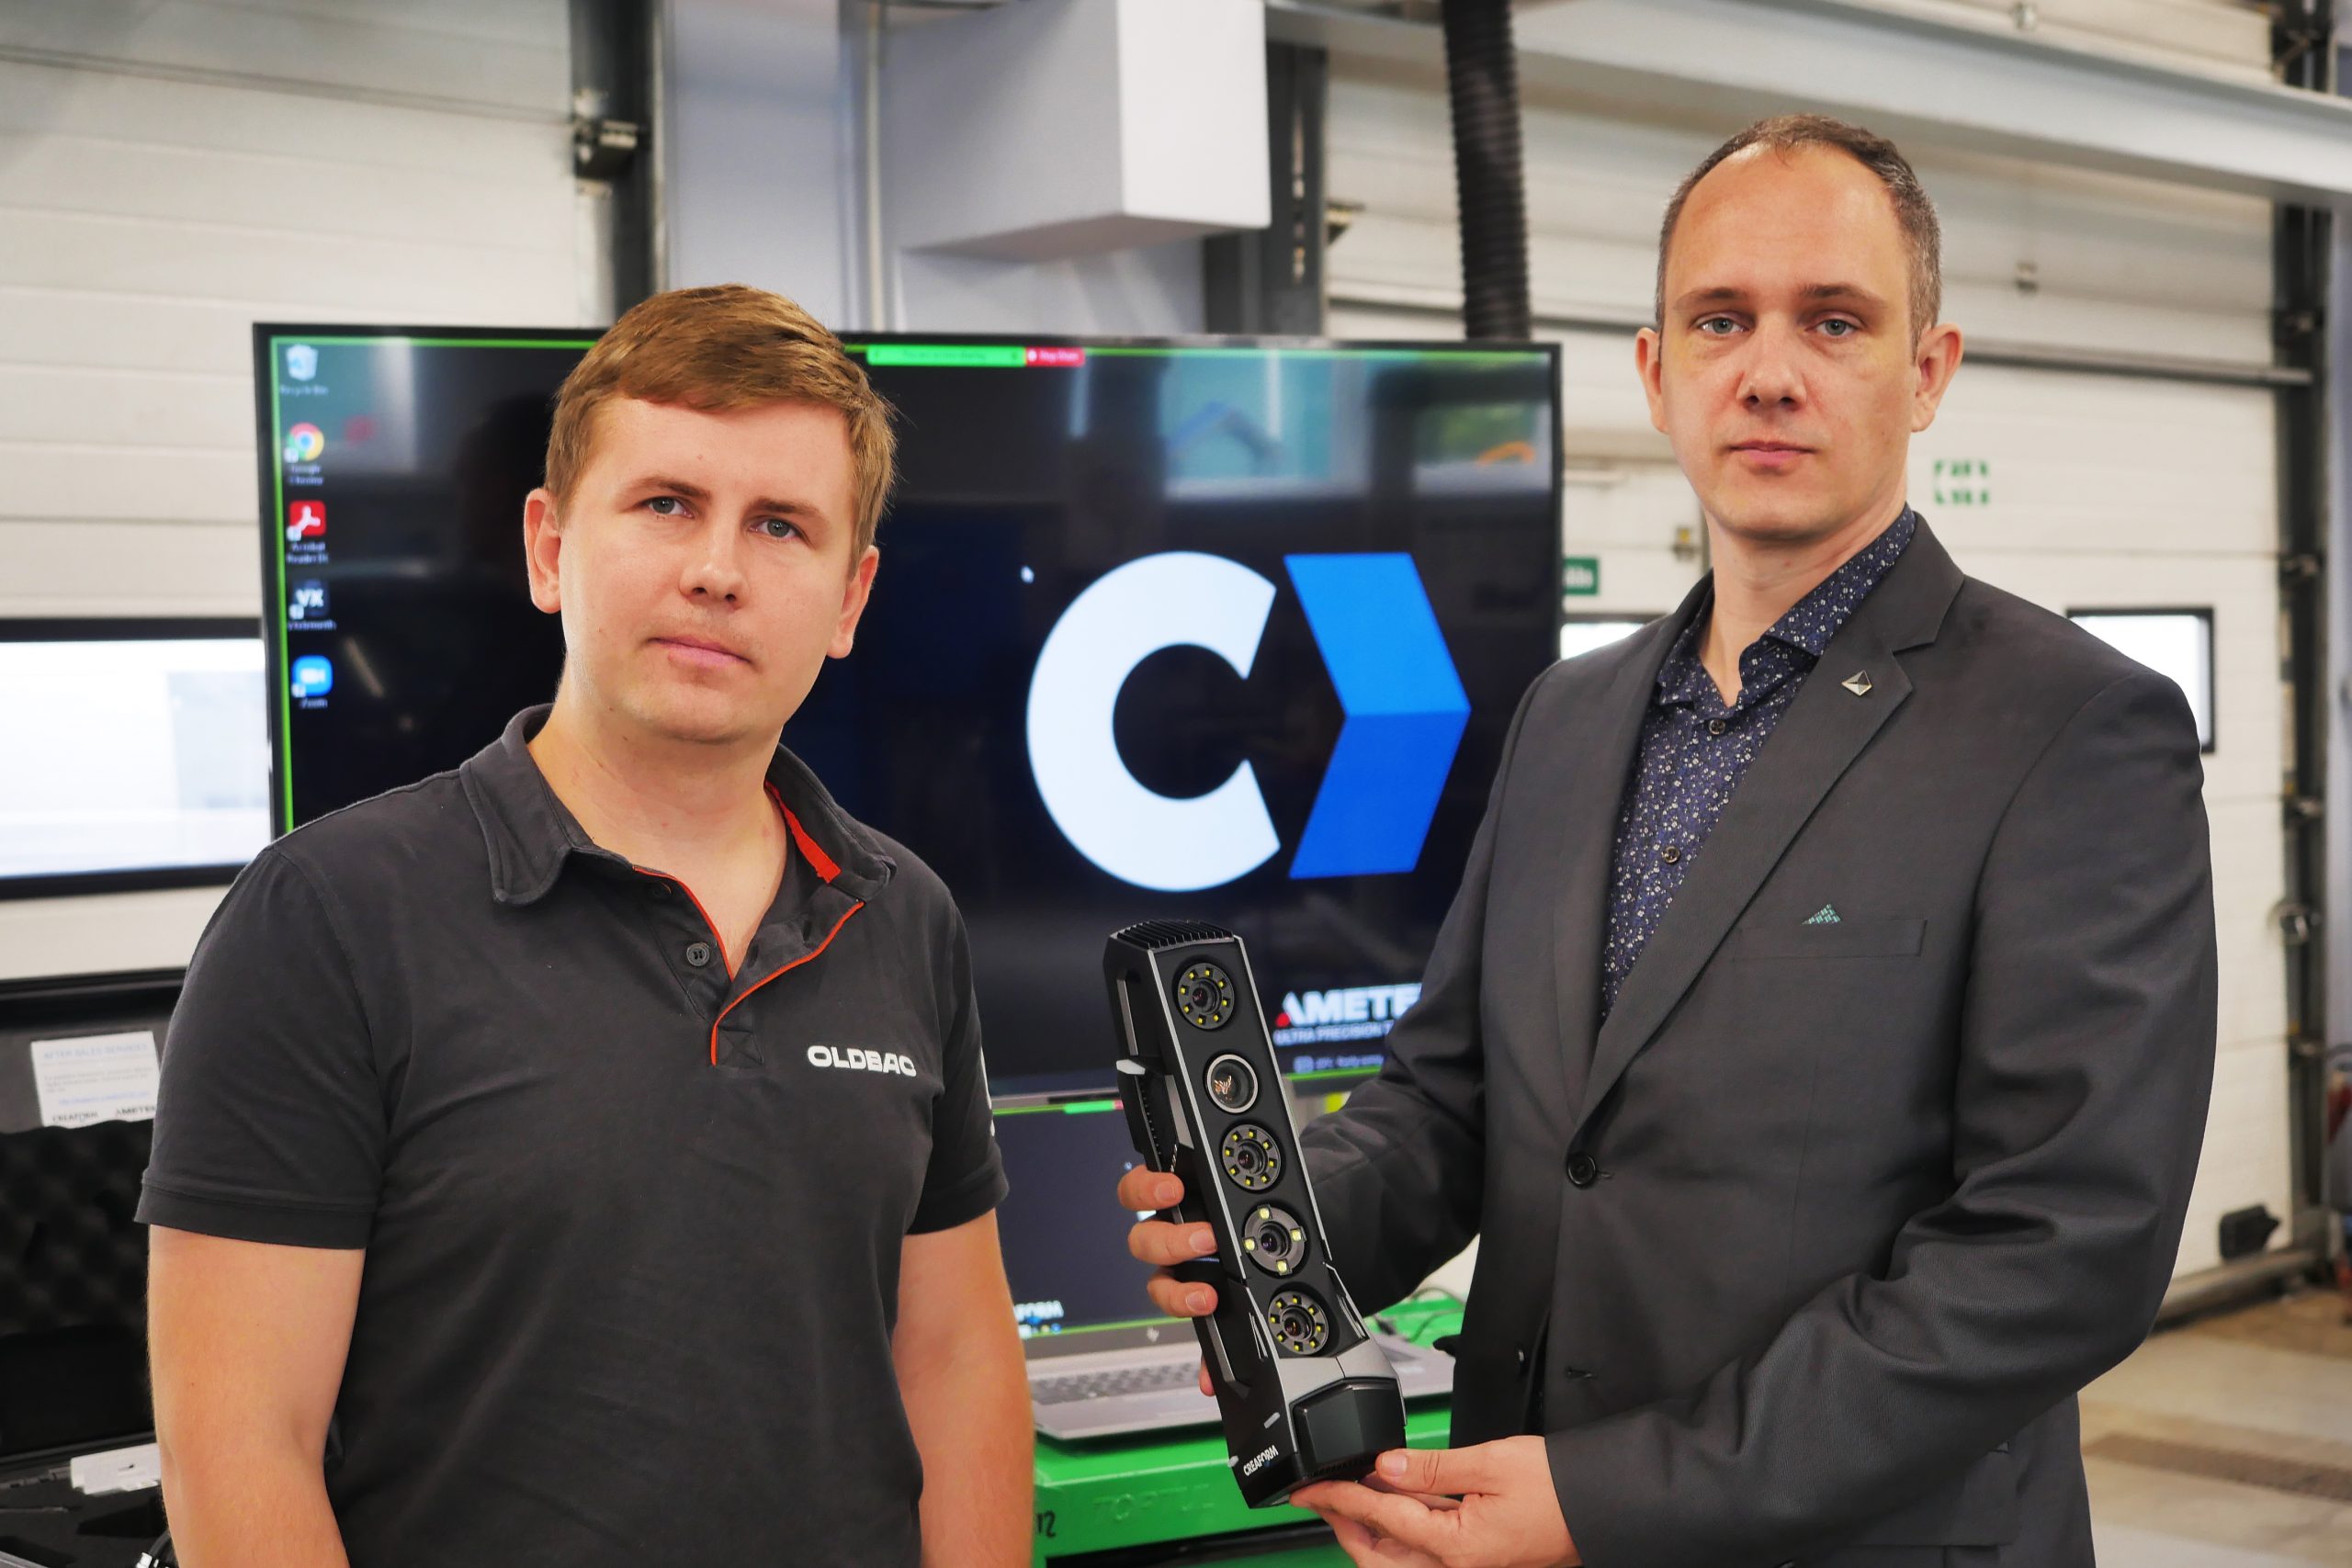 Two men in front of a TV screen which shows the Creaform logo icon. One of the man helds a Go!SCAN 3d scanner in his right hand.